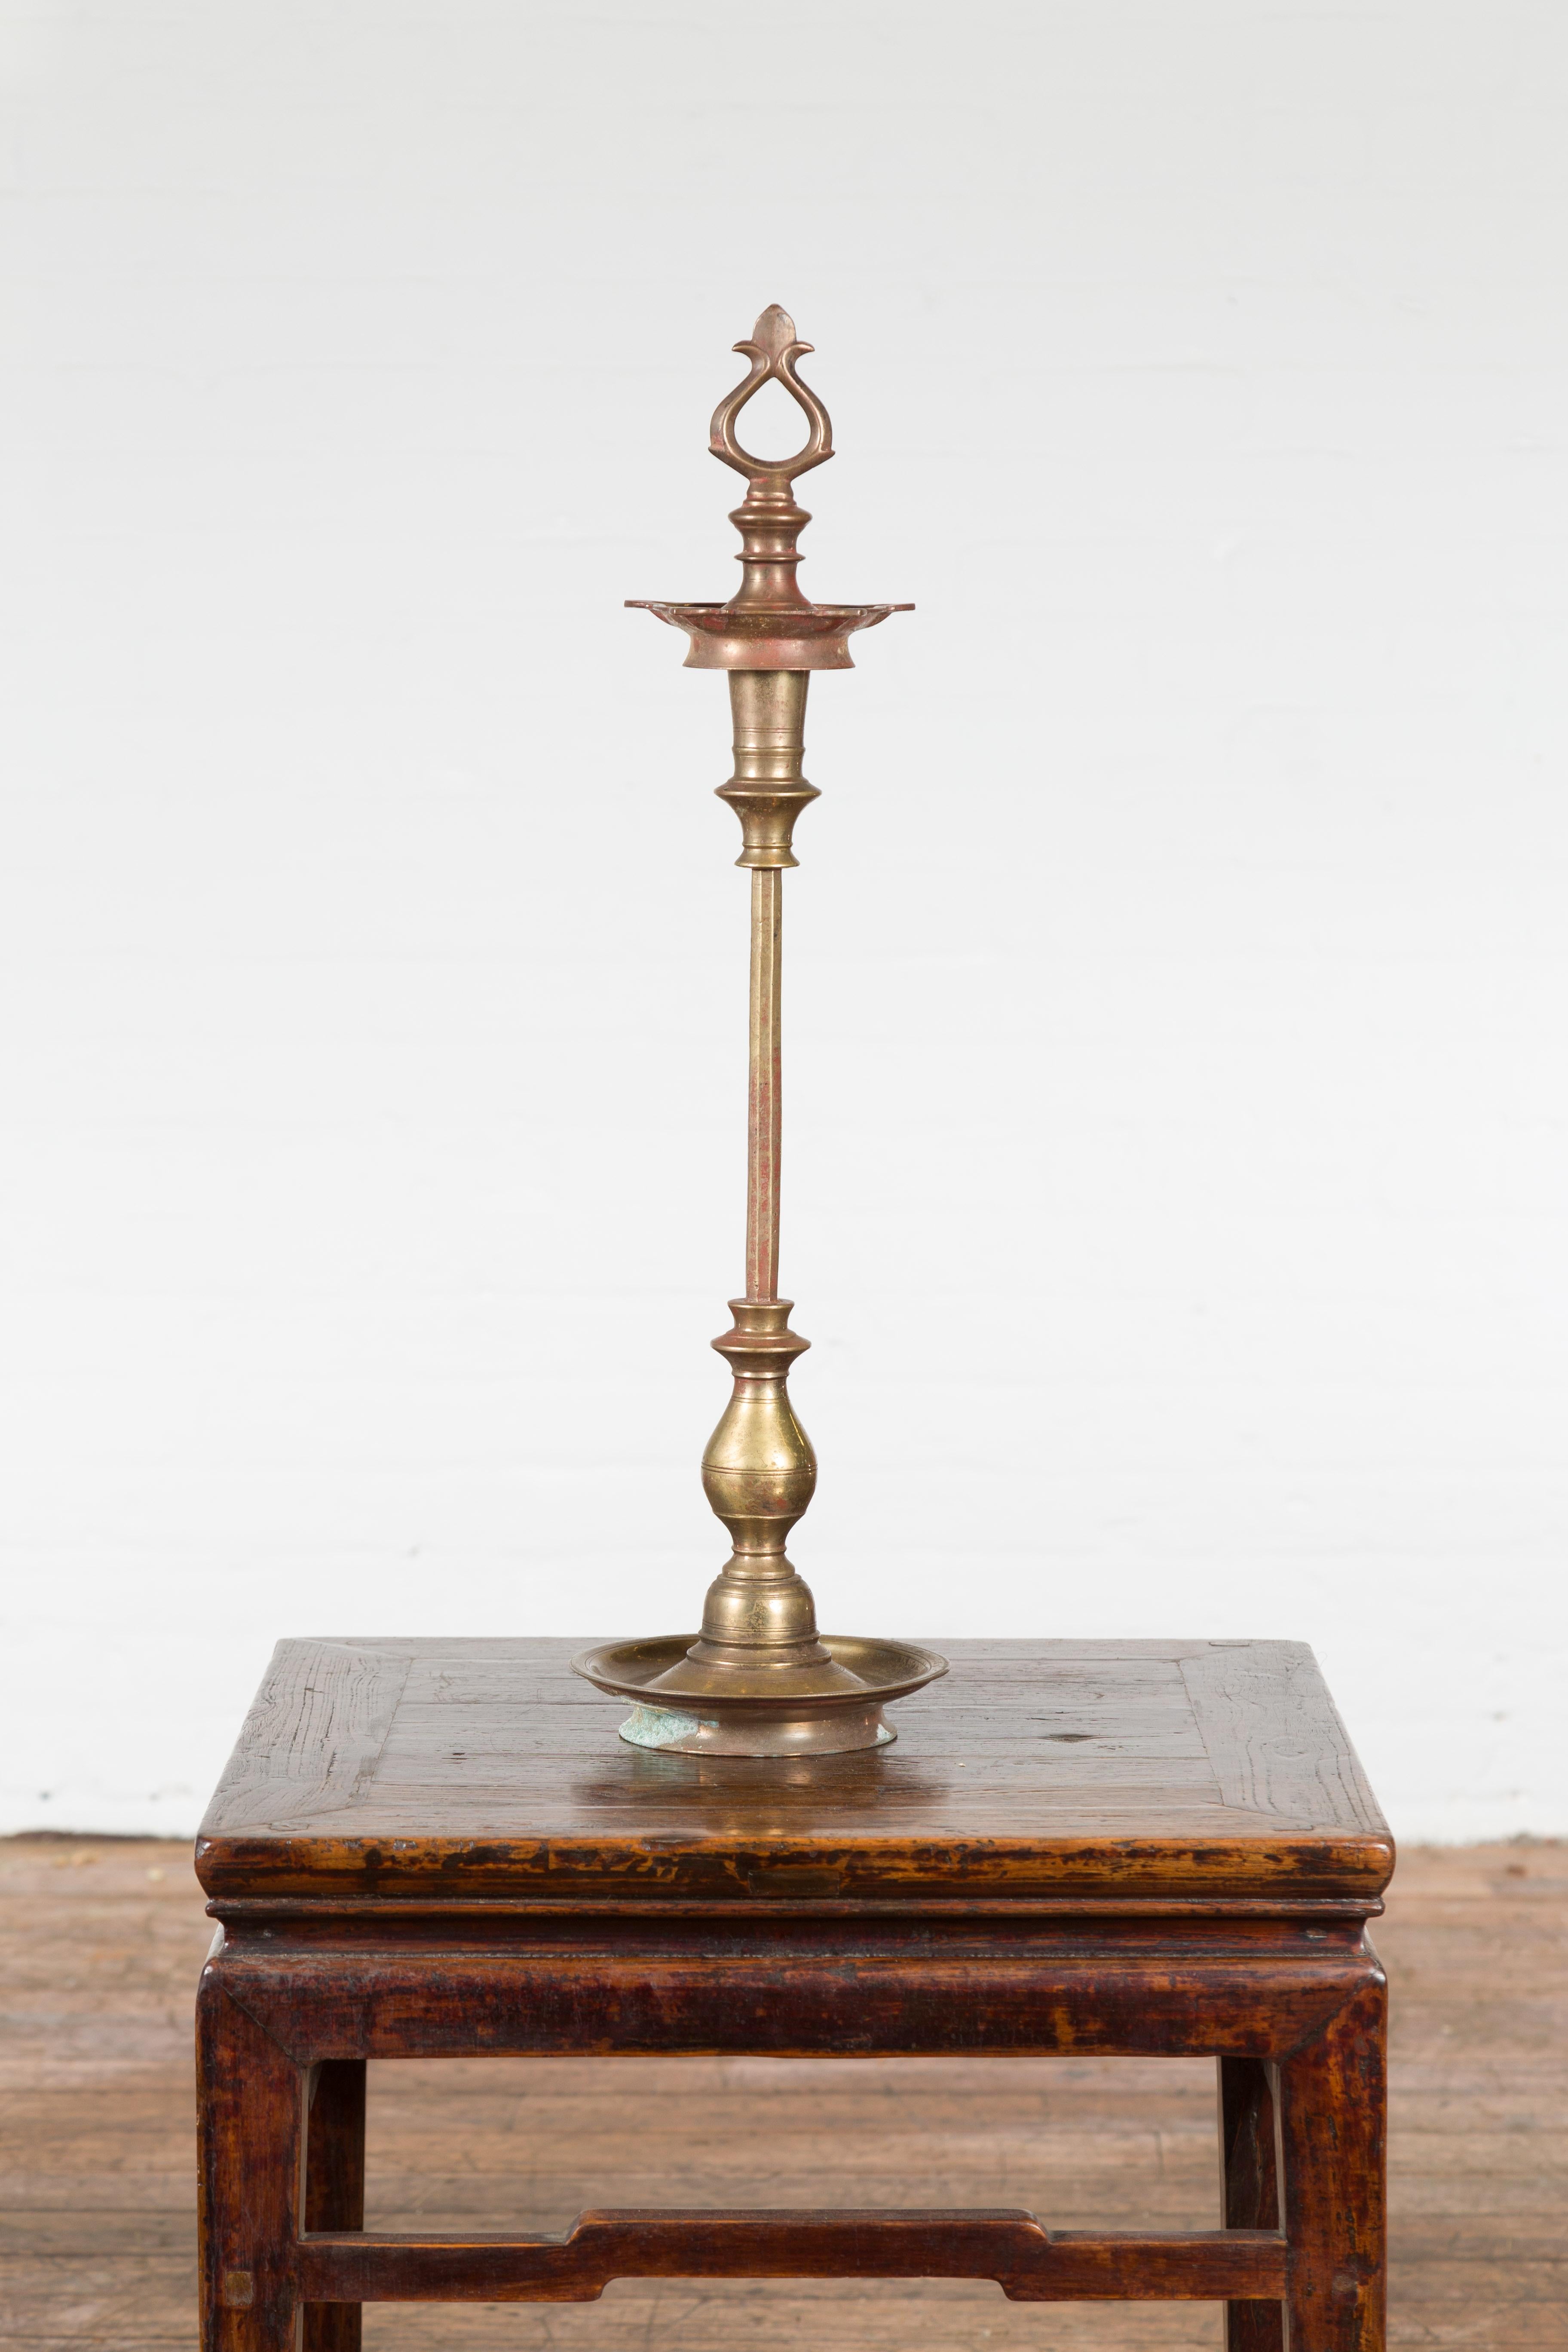 An elegantly defined brass vintage pricket from India used to host candles. The pricket is centered on a slightly raised circular base with the edges slightly raised while the top where the candle will sit is beautifully crafted with defined curves